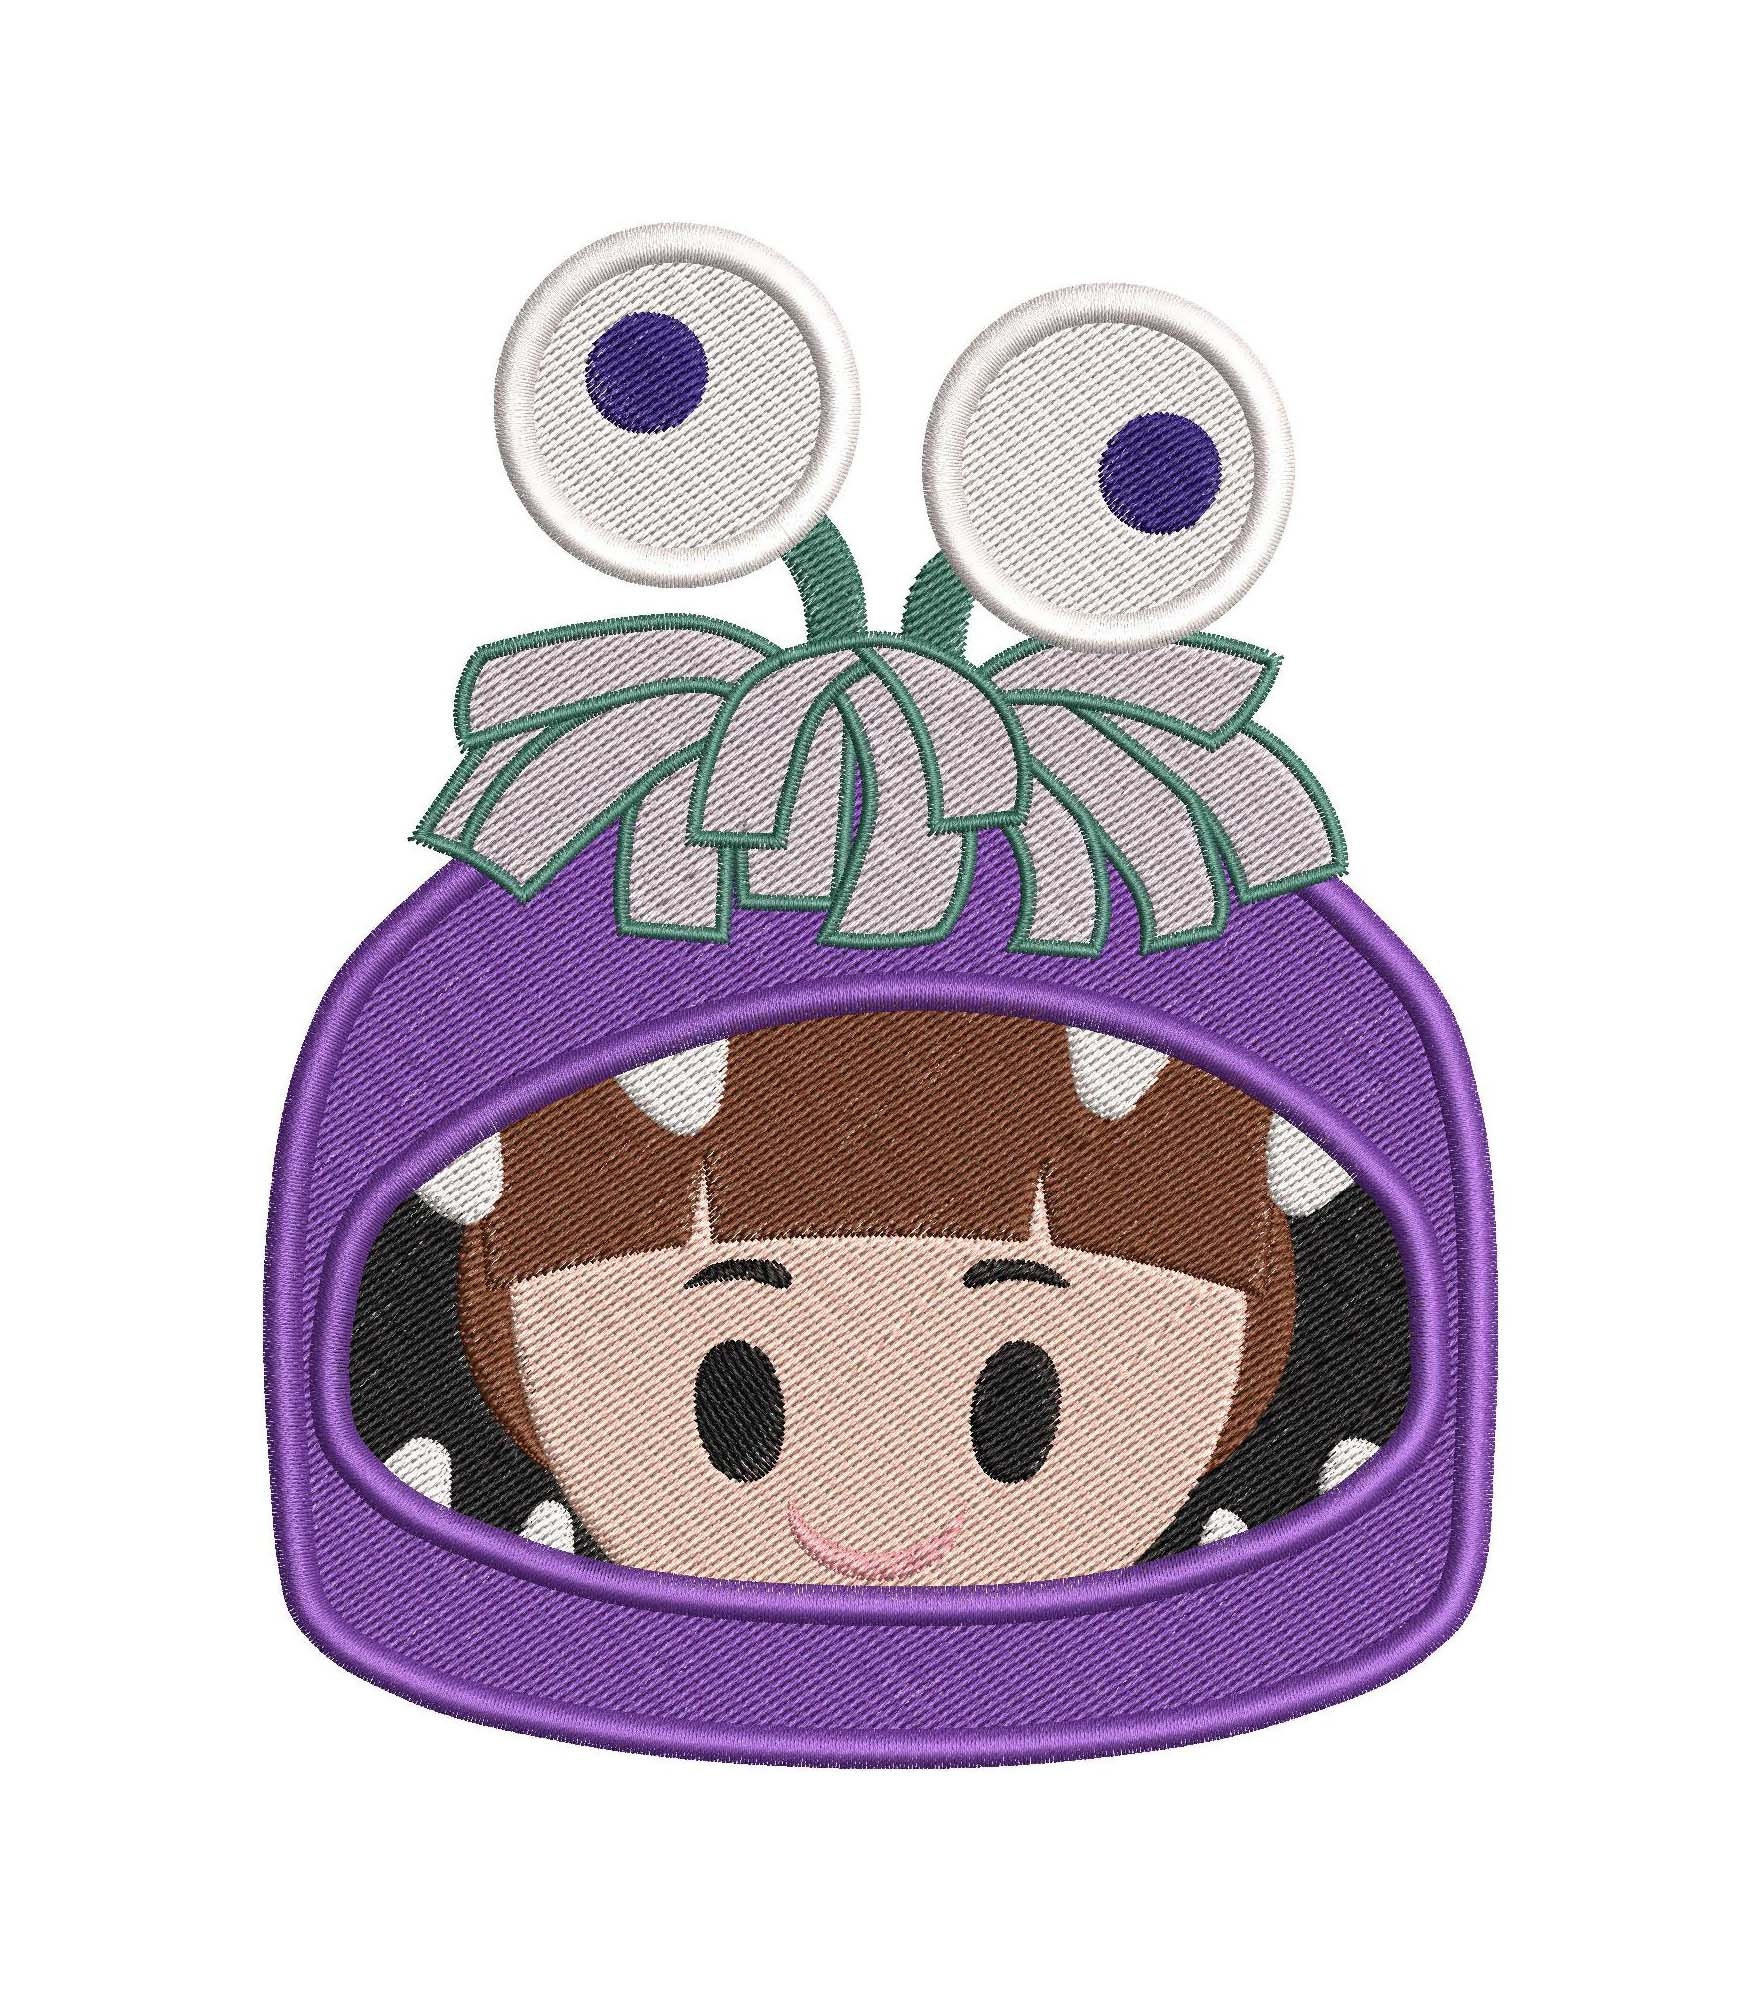 Boo Monsters Inc Emoji Fill Embroidery Design Instant - Etsy Hong Kong